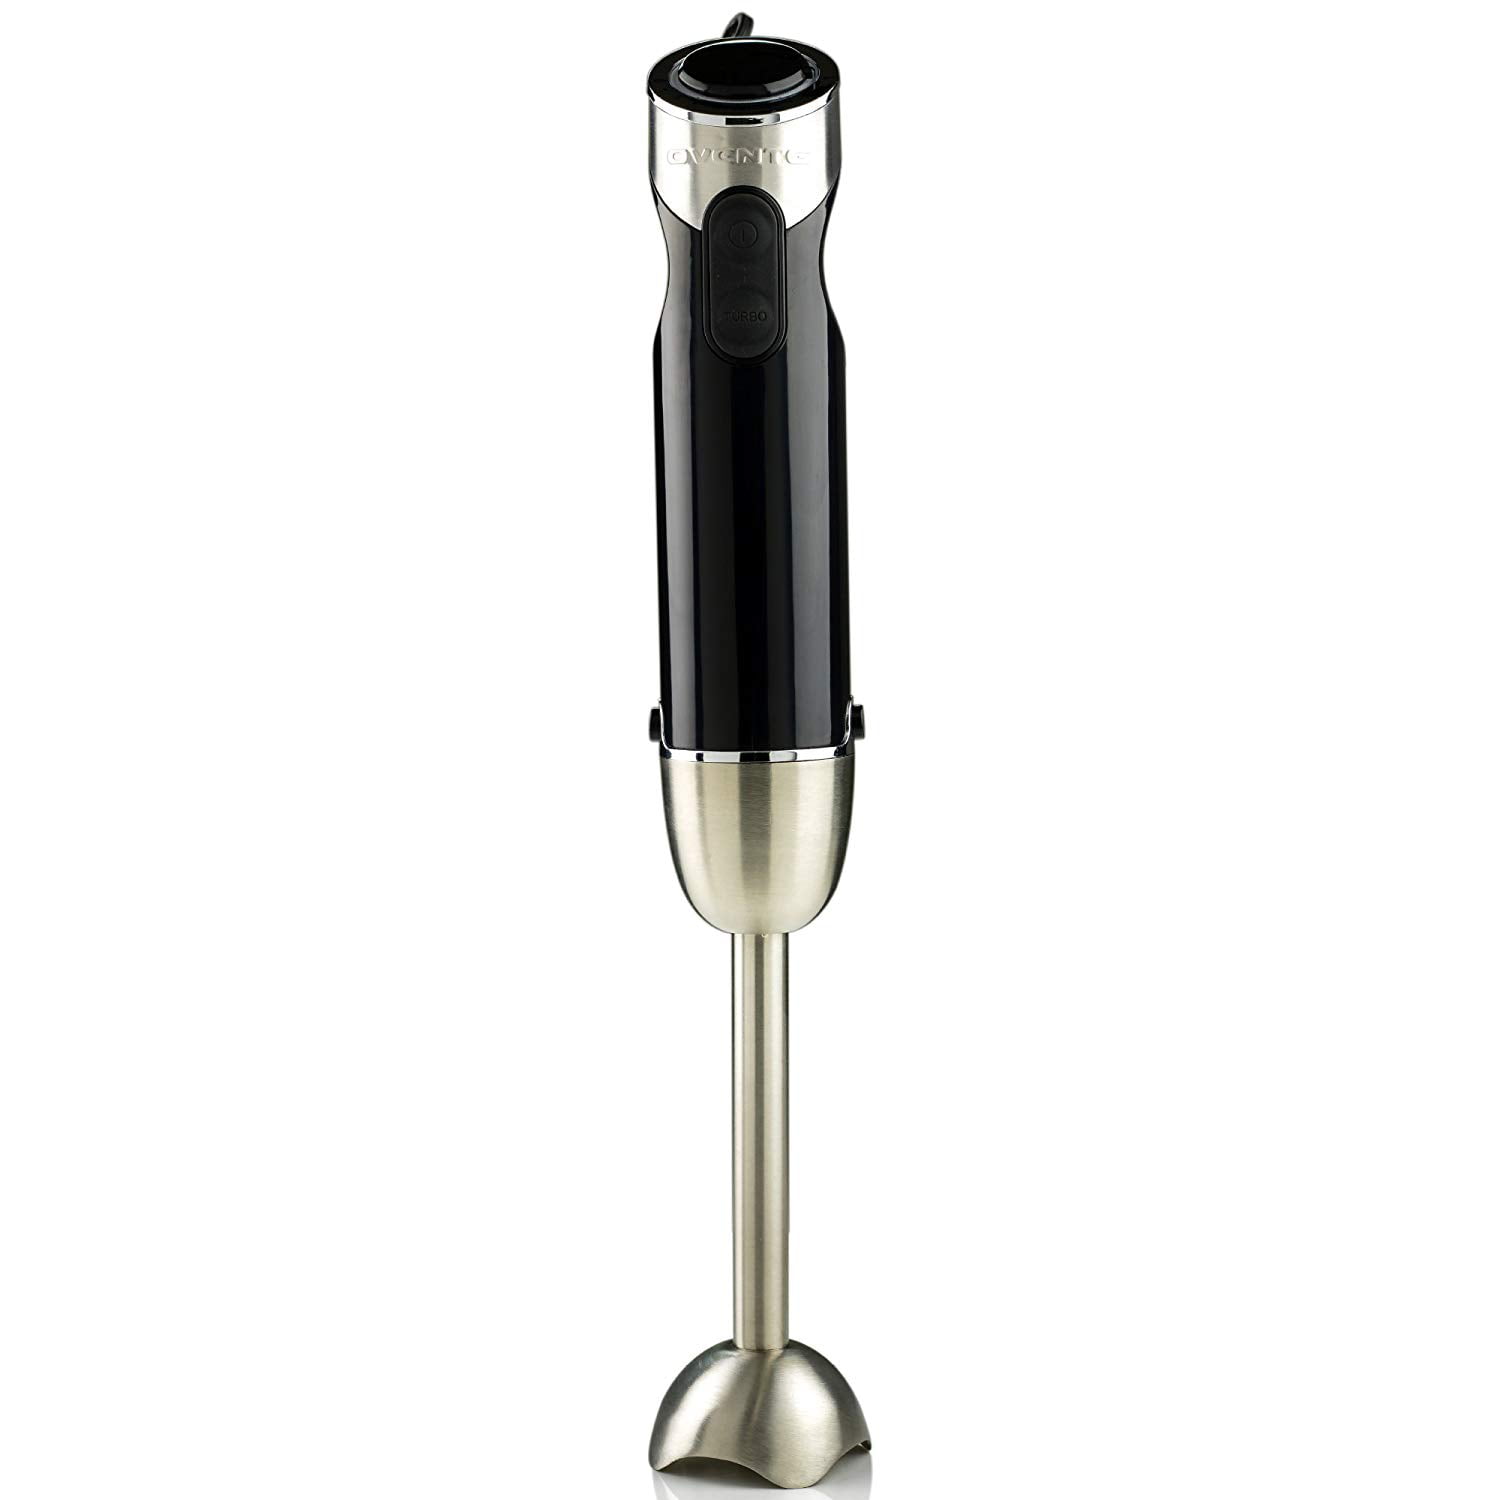 ovente-multi-purpose-immersion-hand-blender-brushed-stainless-steel